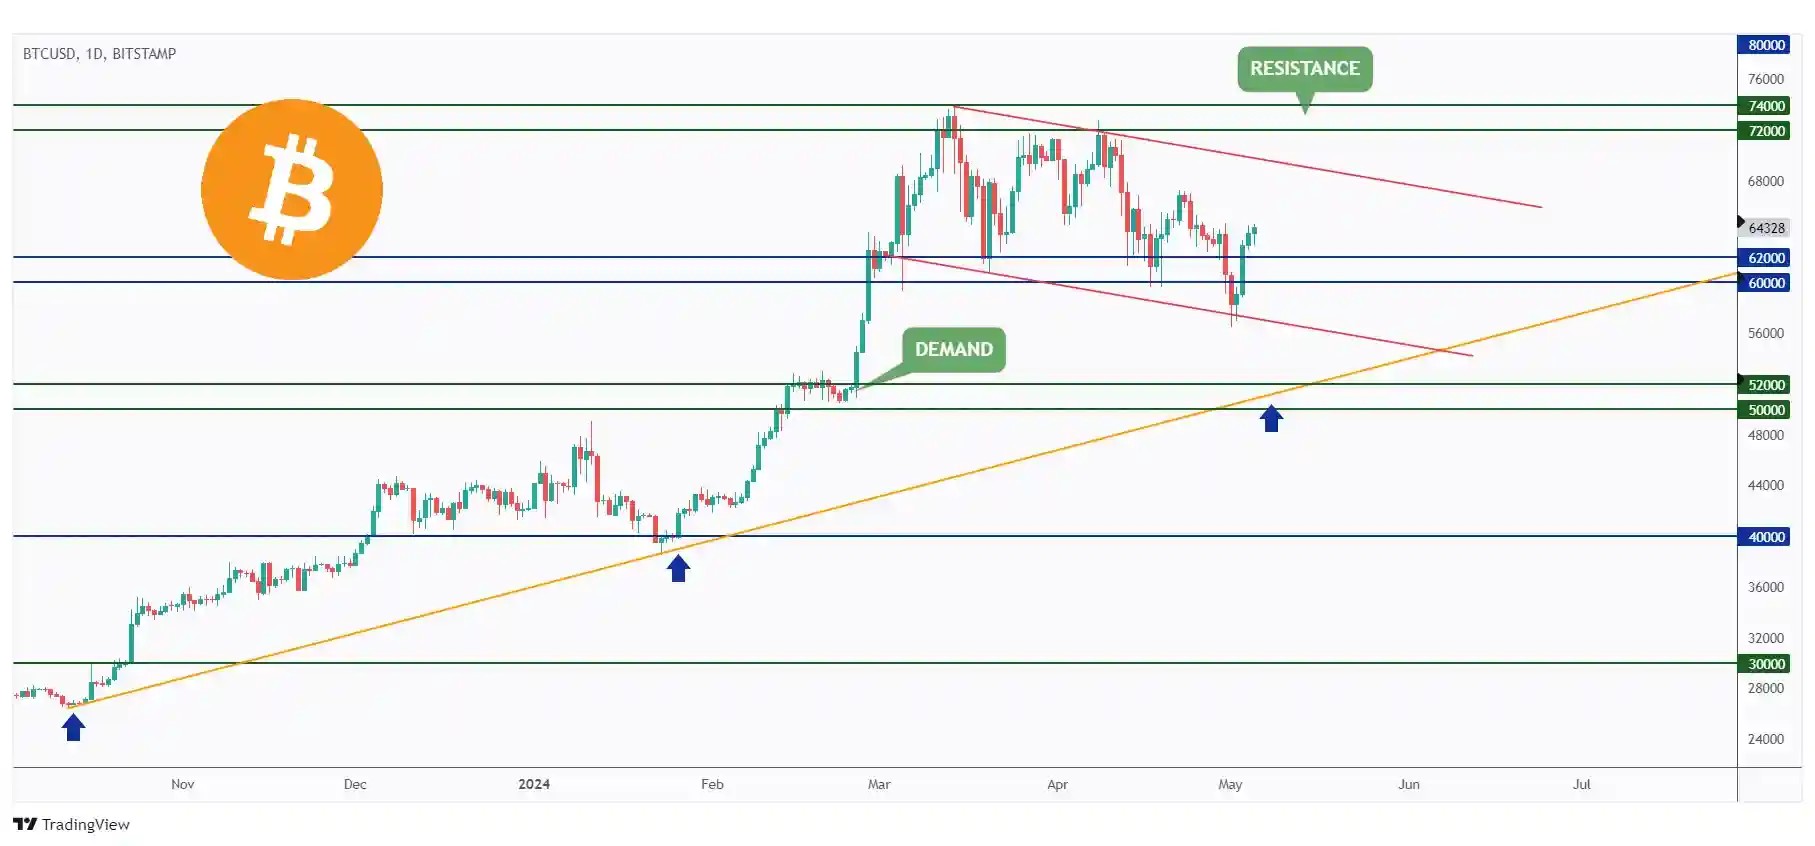 BTC daily chart breaking above the $60,000 resistance and now heading towards $68,000.